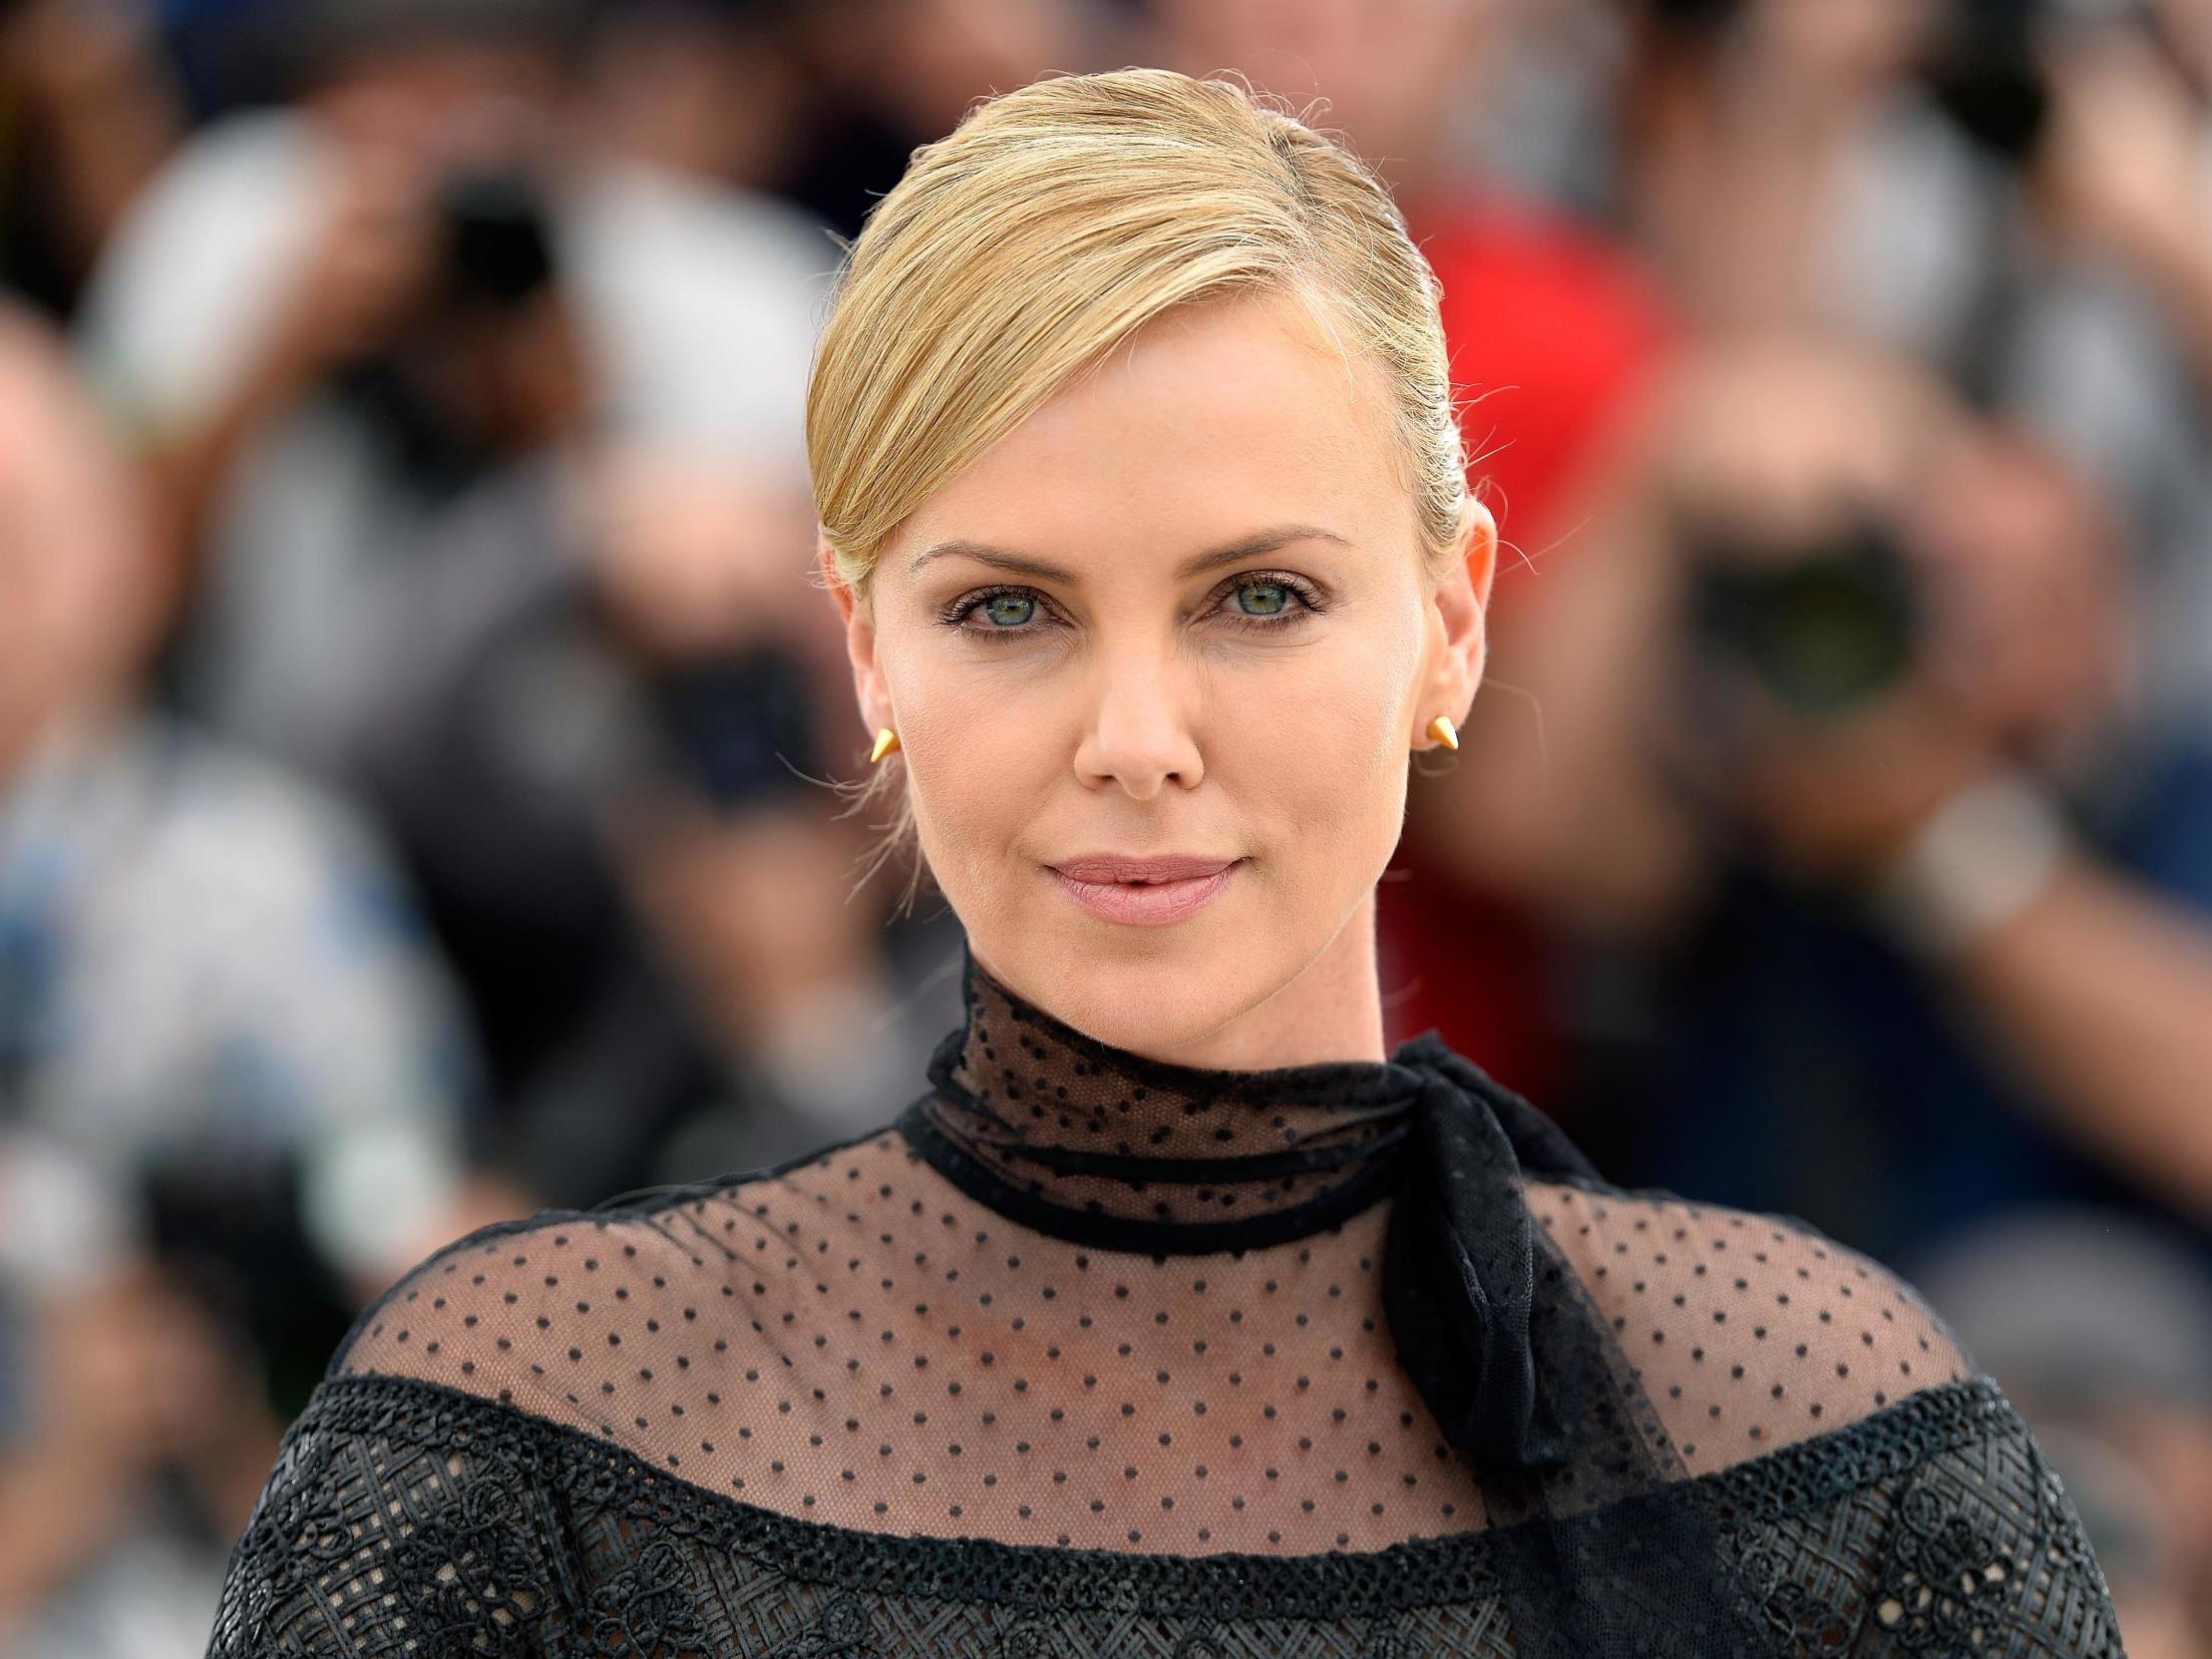 Charlize Theron interview ‘Watching Bombshell has been eyeopening to